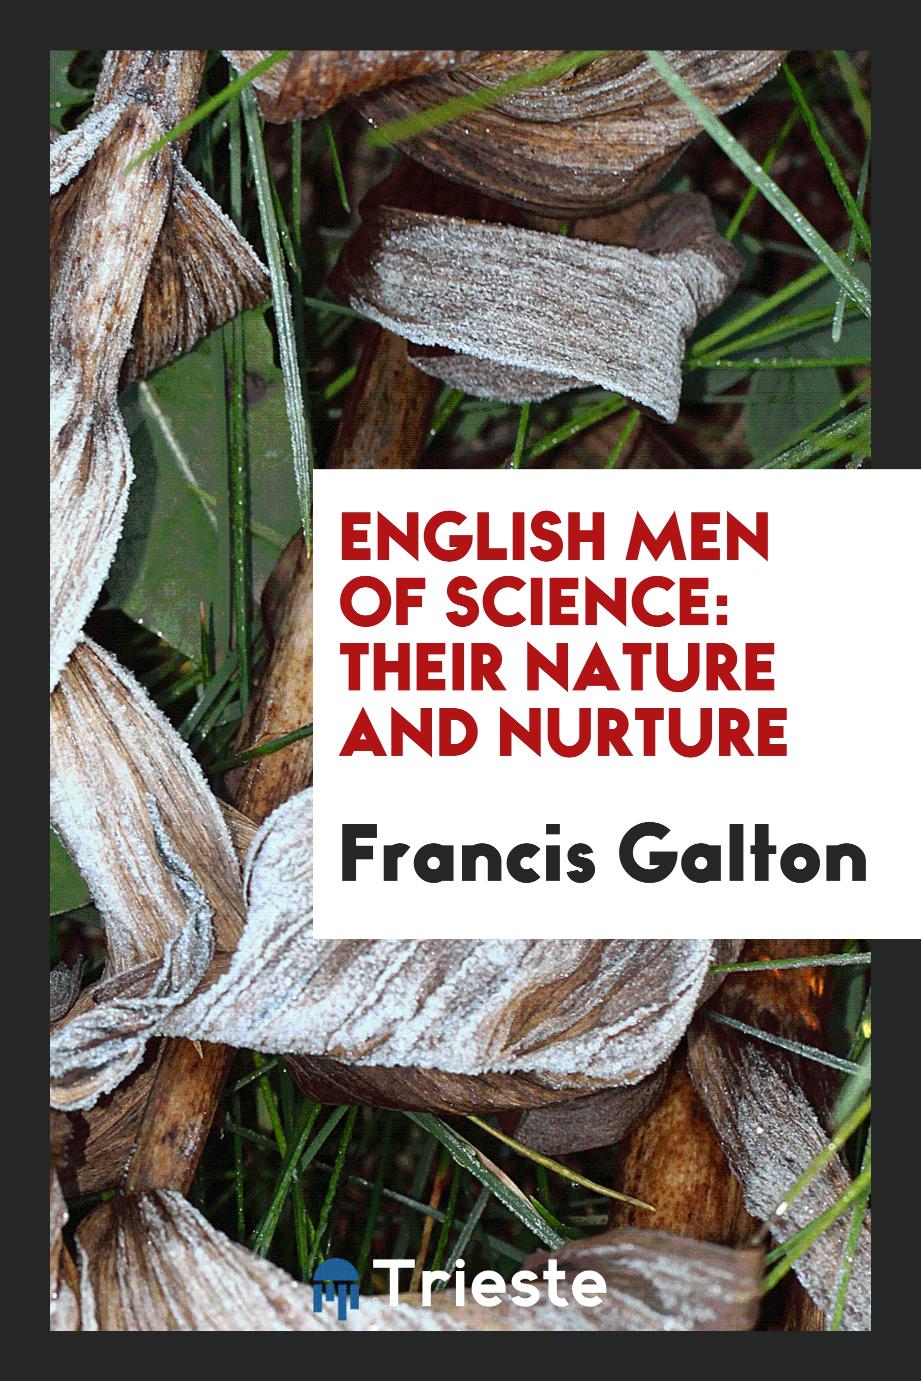 Francis Galton - English Men of Science: Their Nature and Nurture